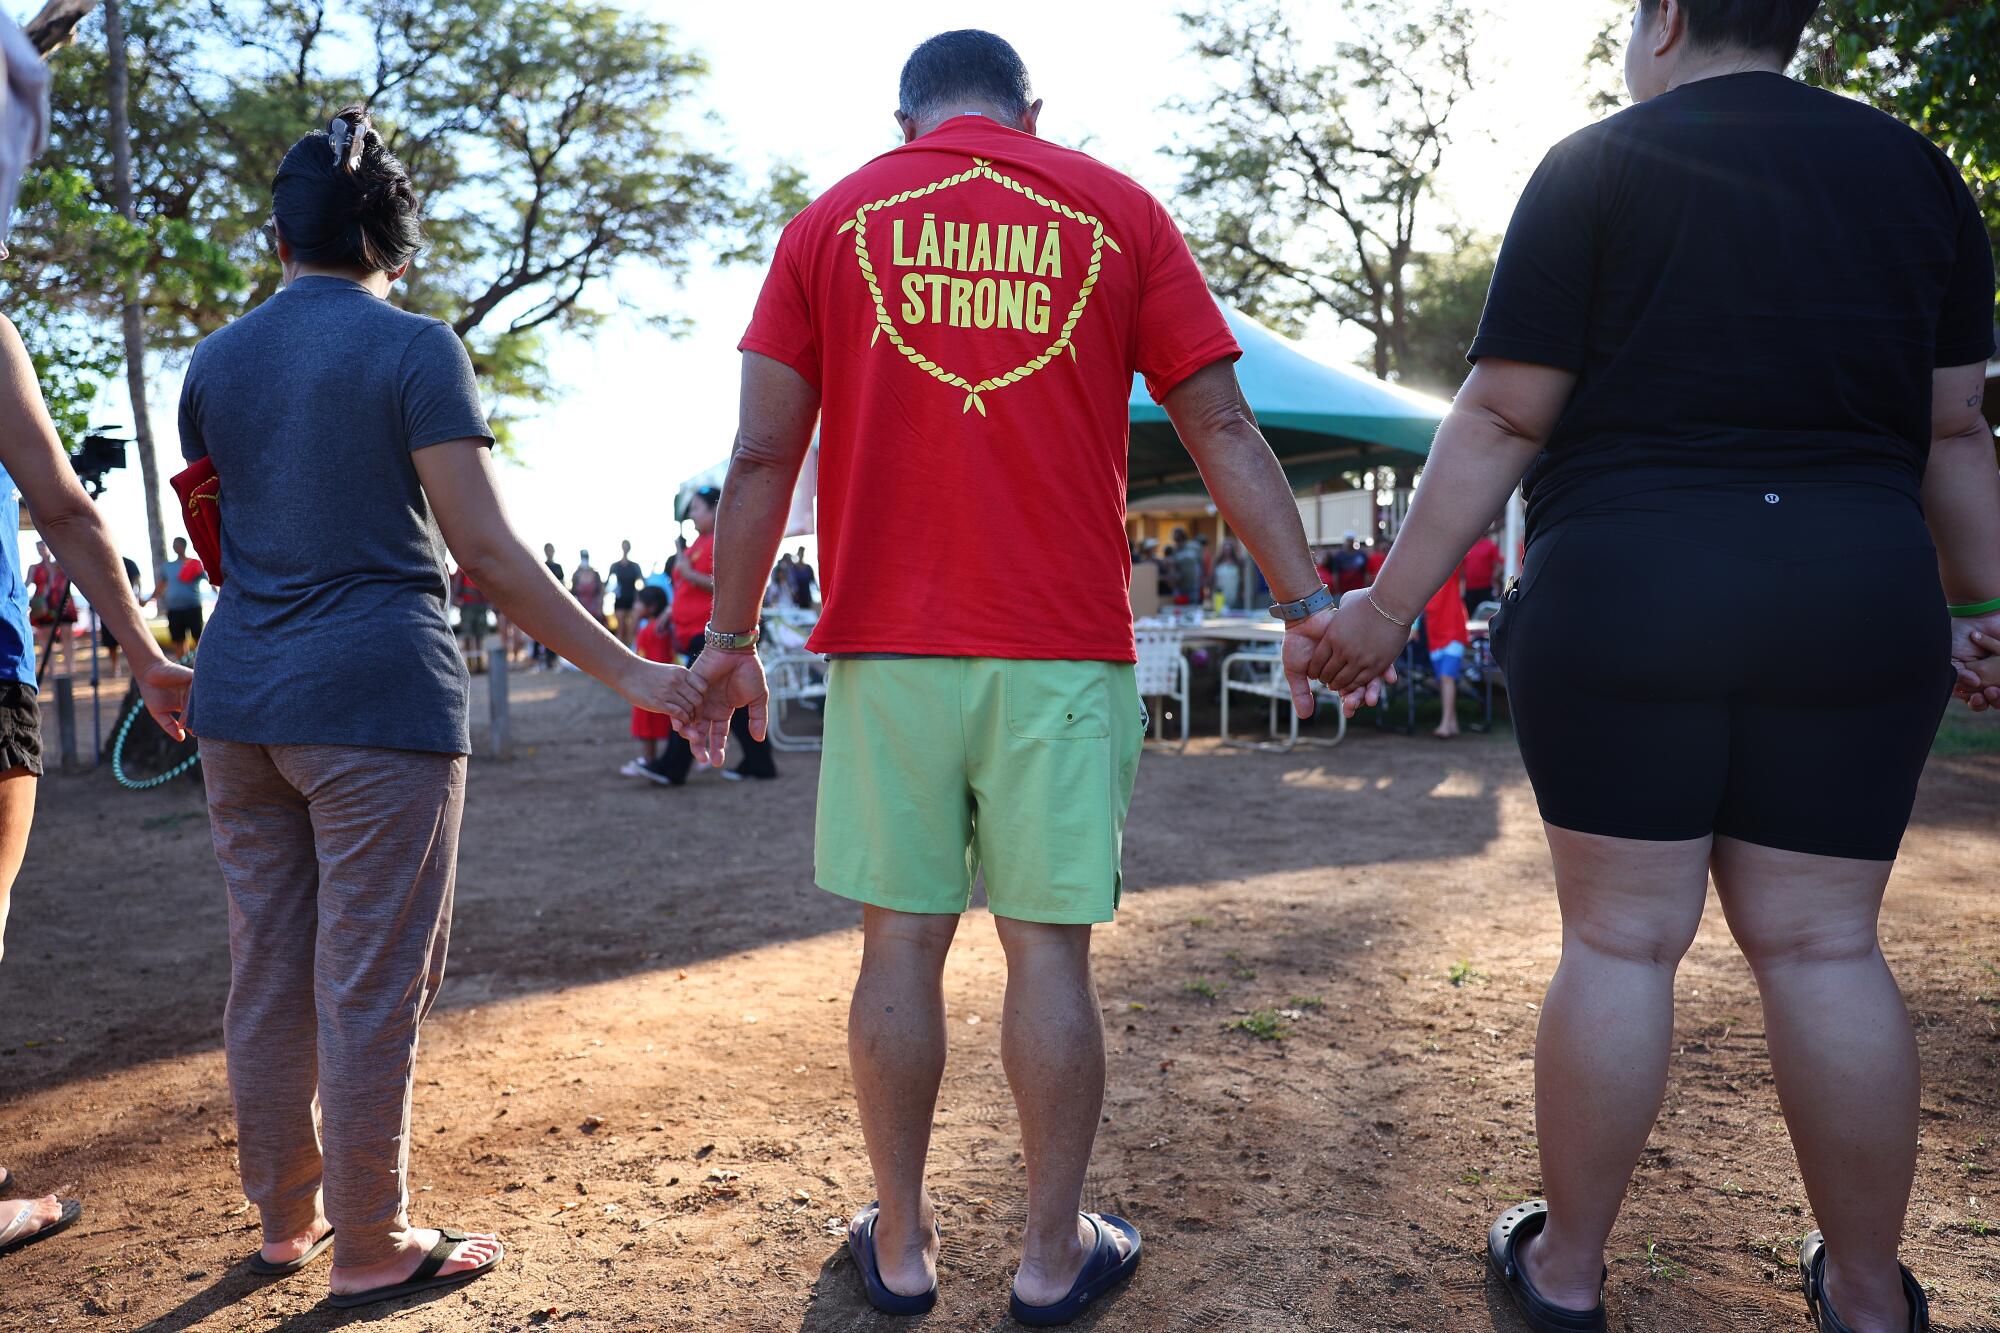 Community members hold hands in a prayer circle and a man wears a "Lahaina strong" T-shirt.